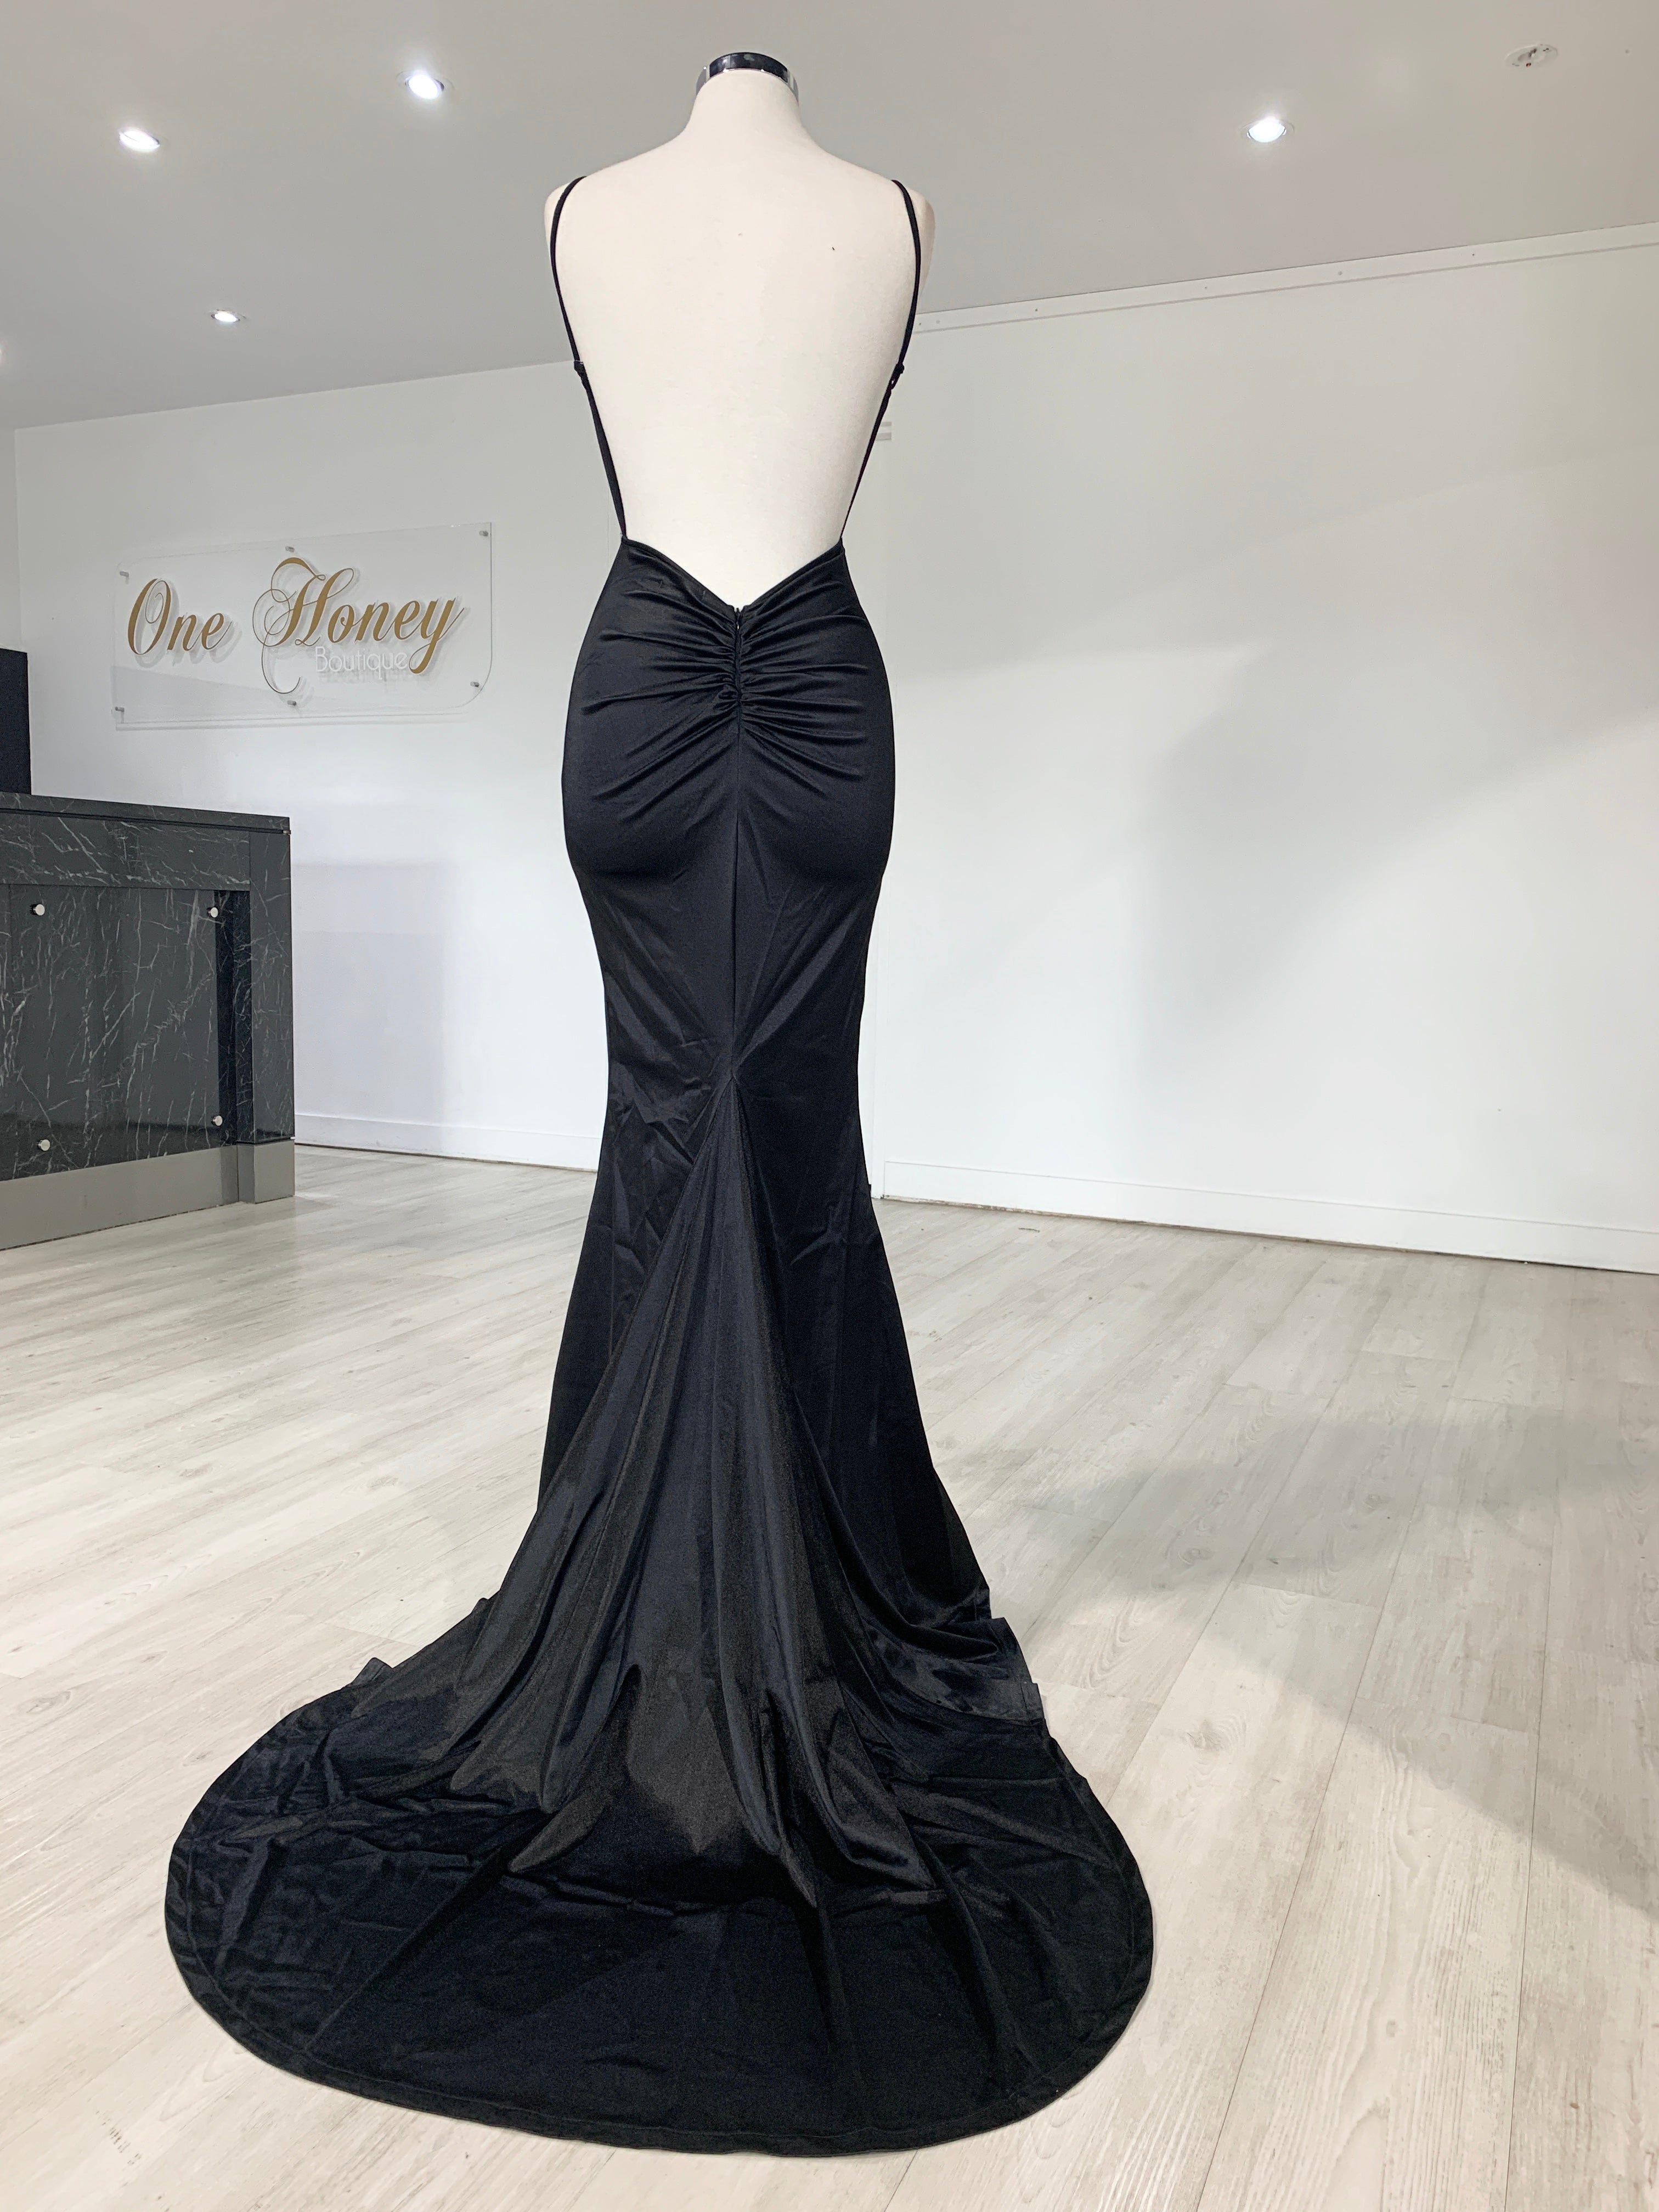 Honey Couture MILEE Black Low Back Mermaid Evening Gown Dress {vendor} AfterPay Humm ZipPay LayBuy Sezzle